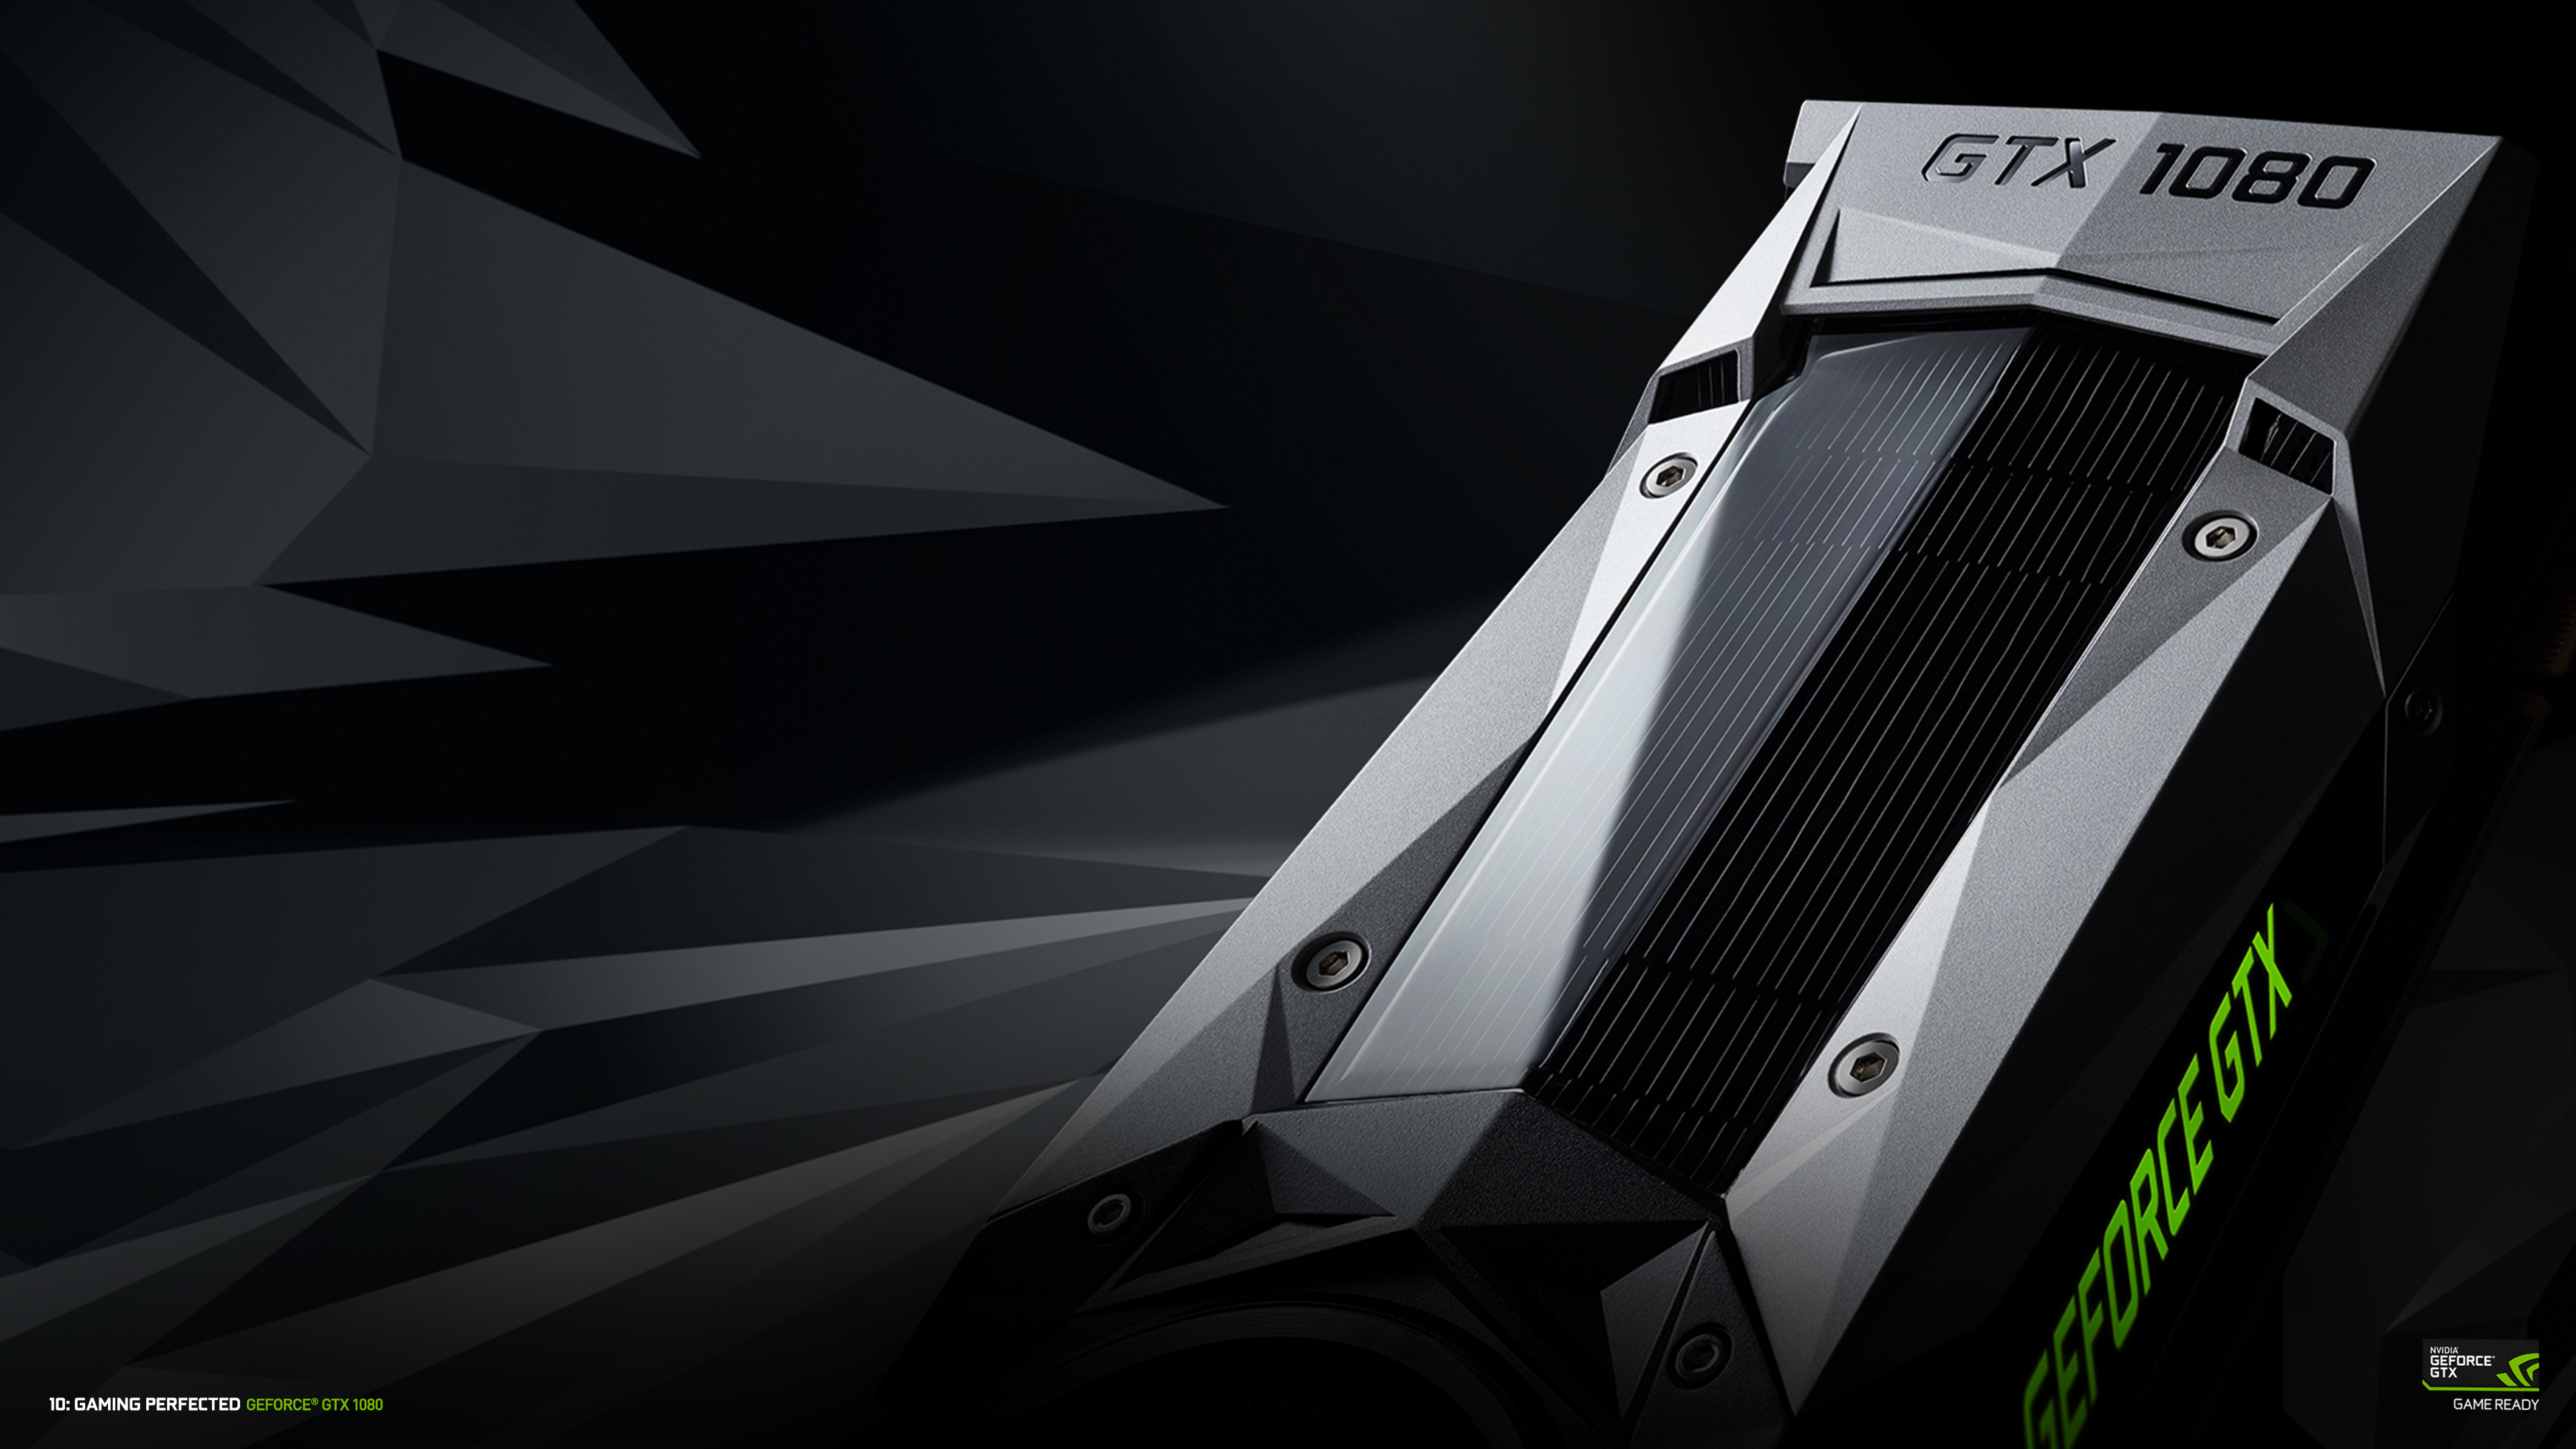 GeForce Wallpaper for your Gaming Rig